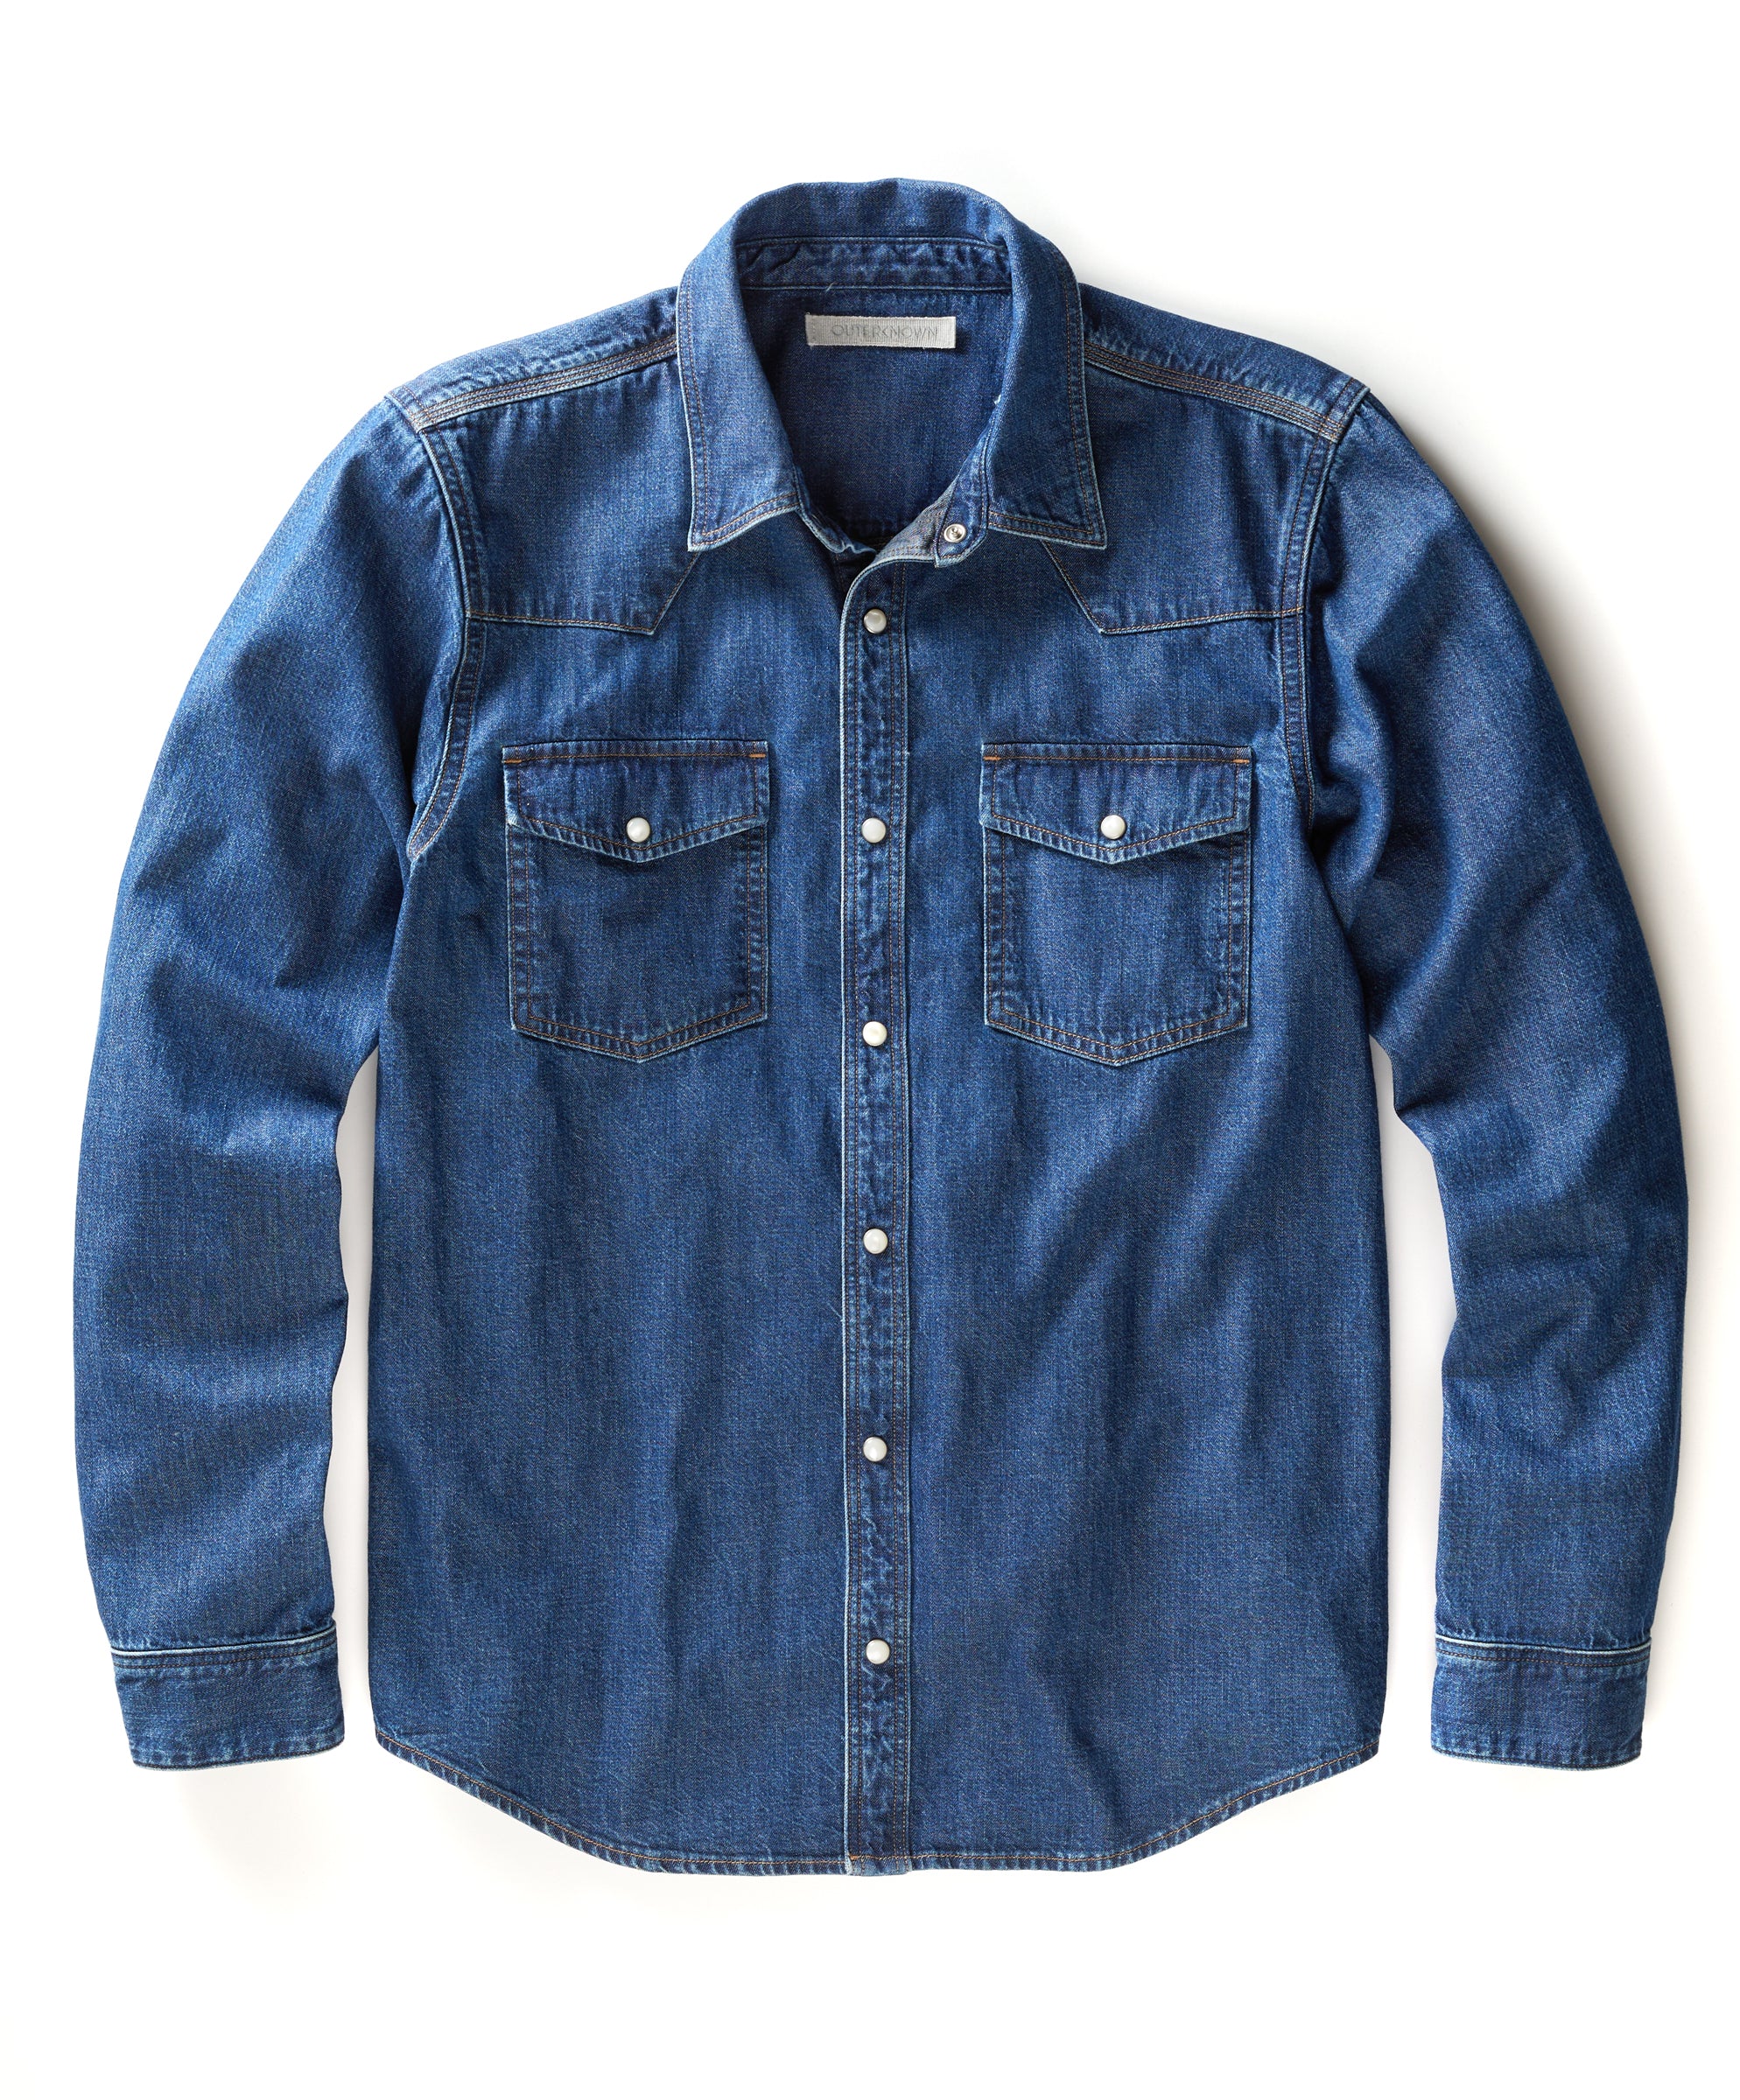 Westerly Denim Shirt | Men's Shirts | Outerknown